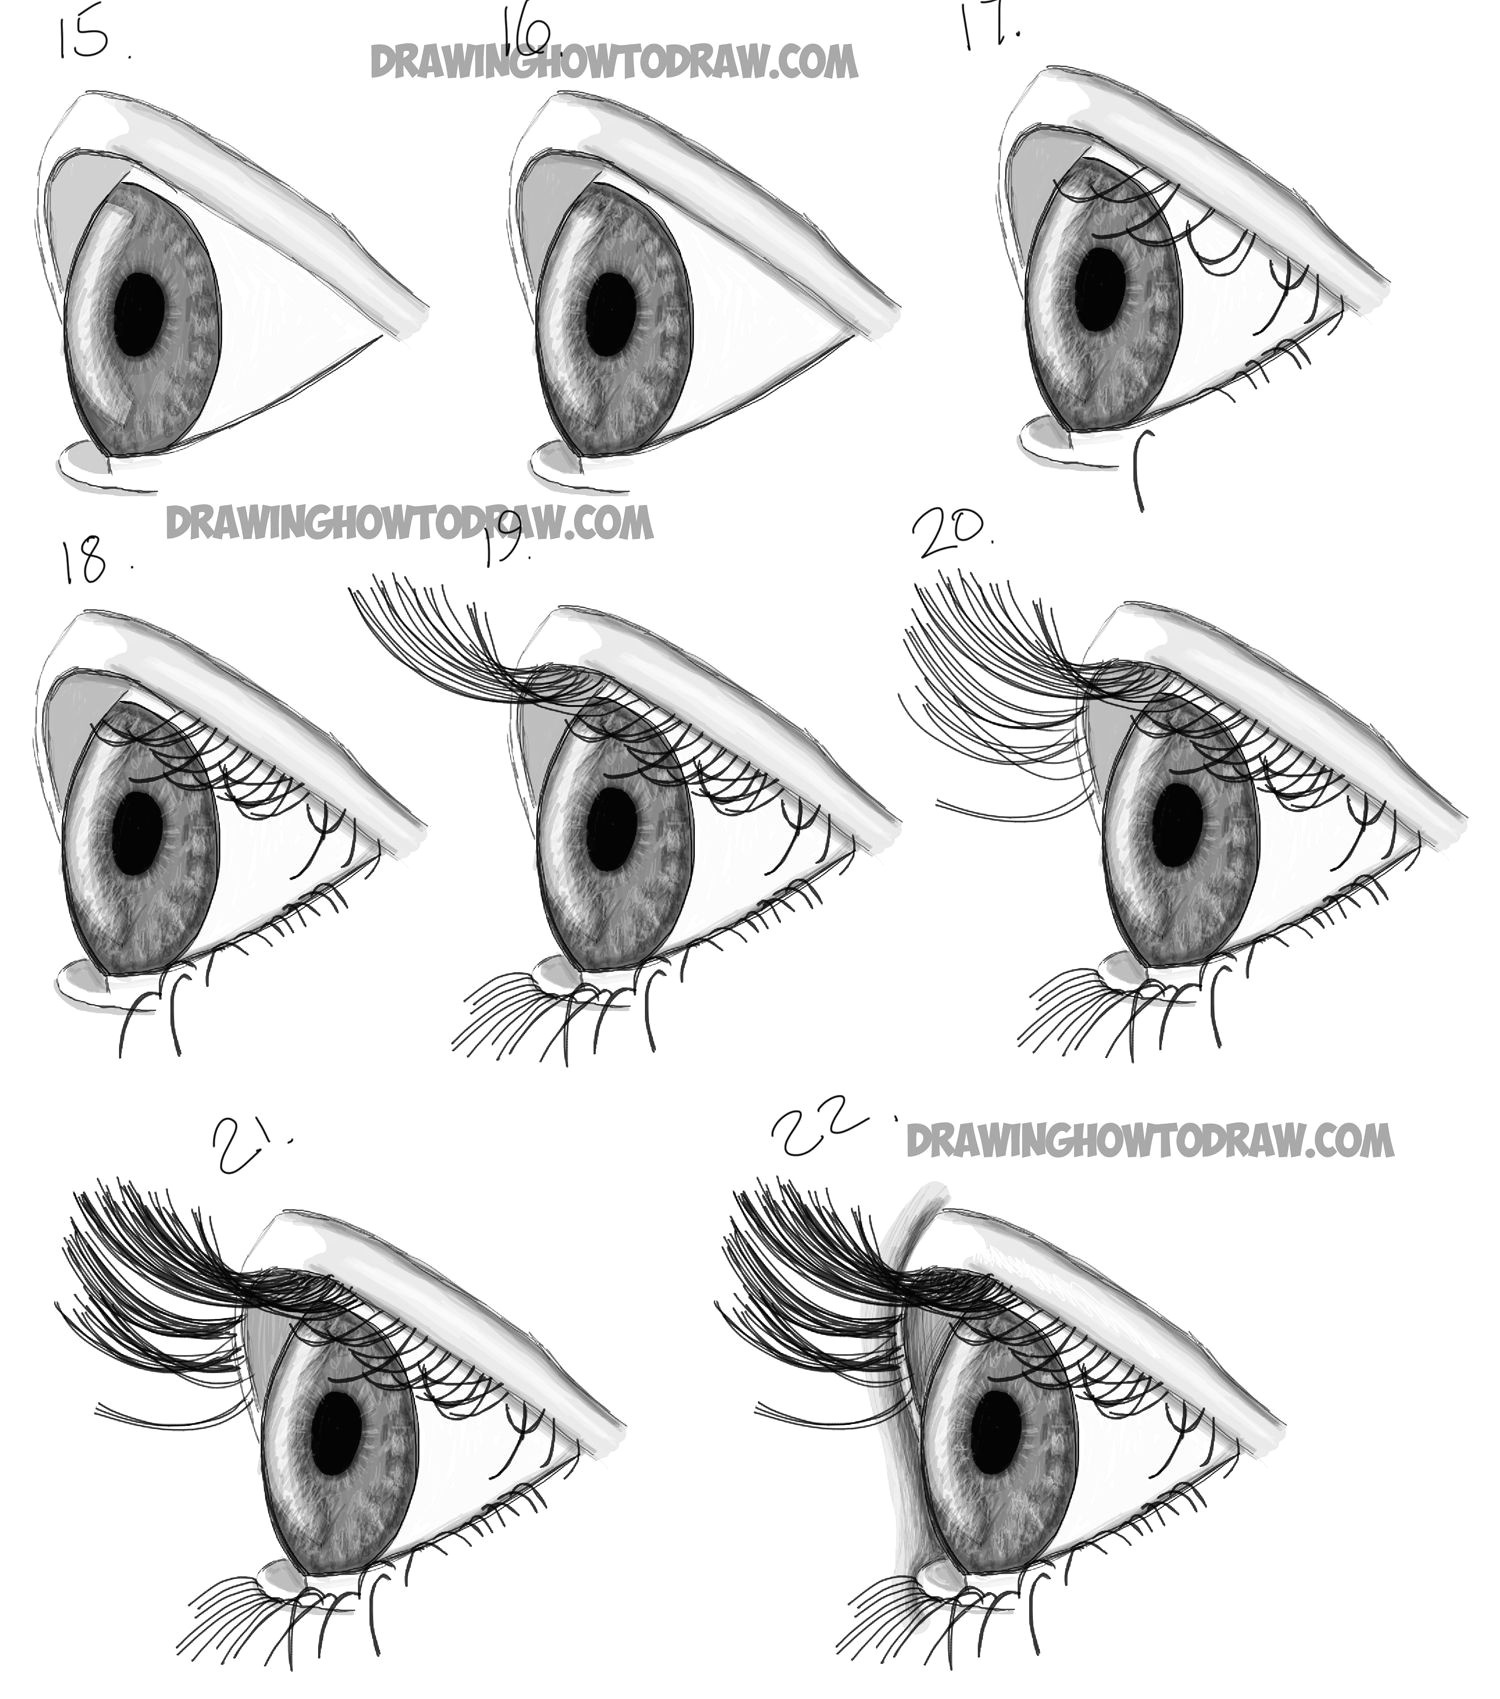 Drawing Eyes Tutorials Step by Step How to Draw Realistic Eyes From the Side Profile View Step by Step